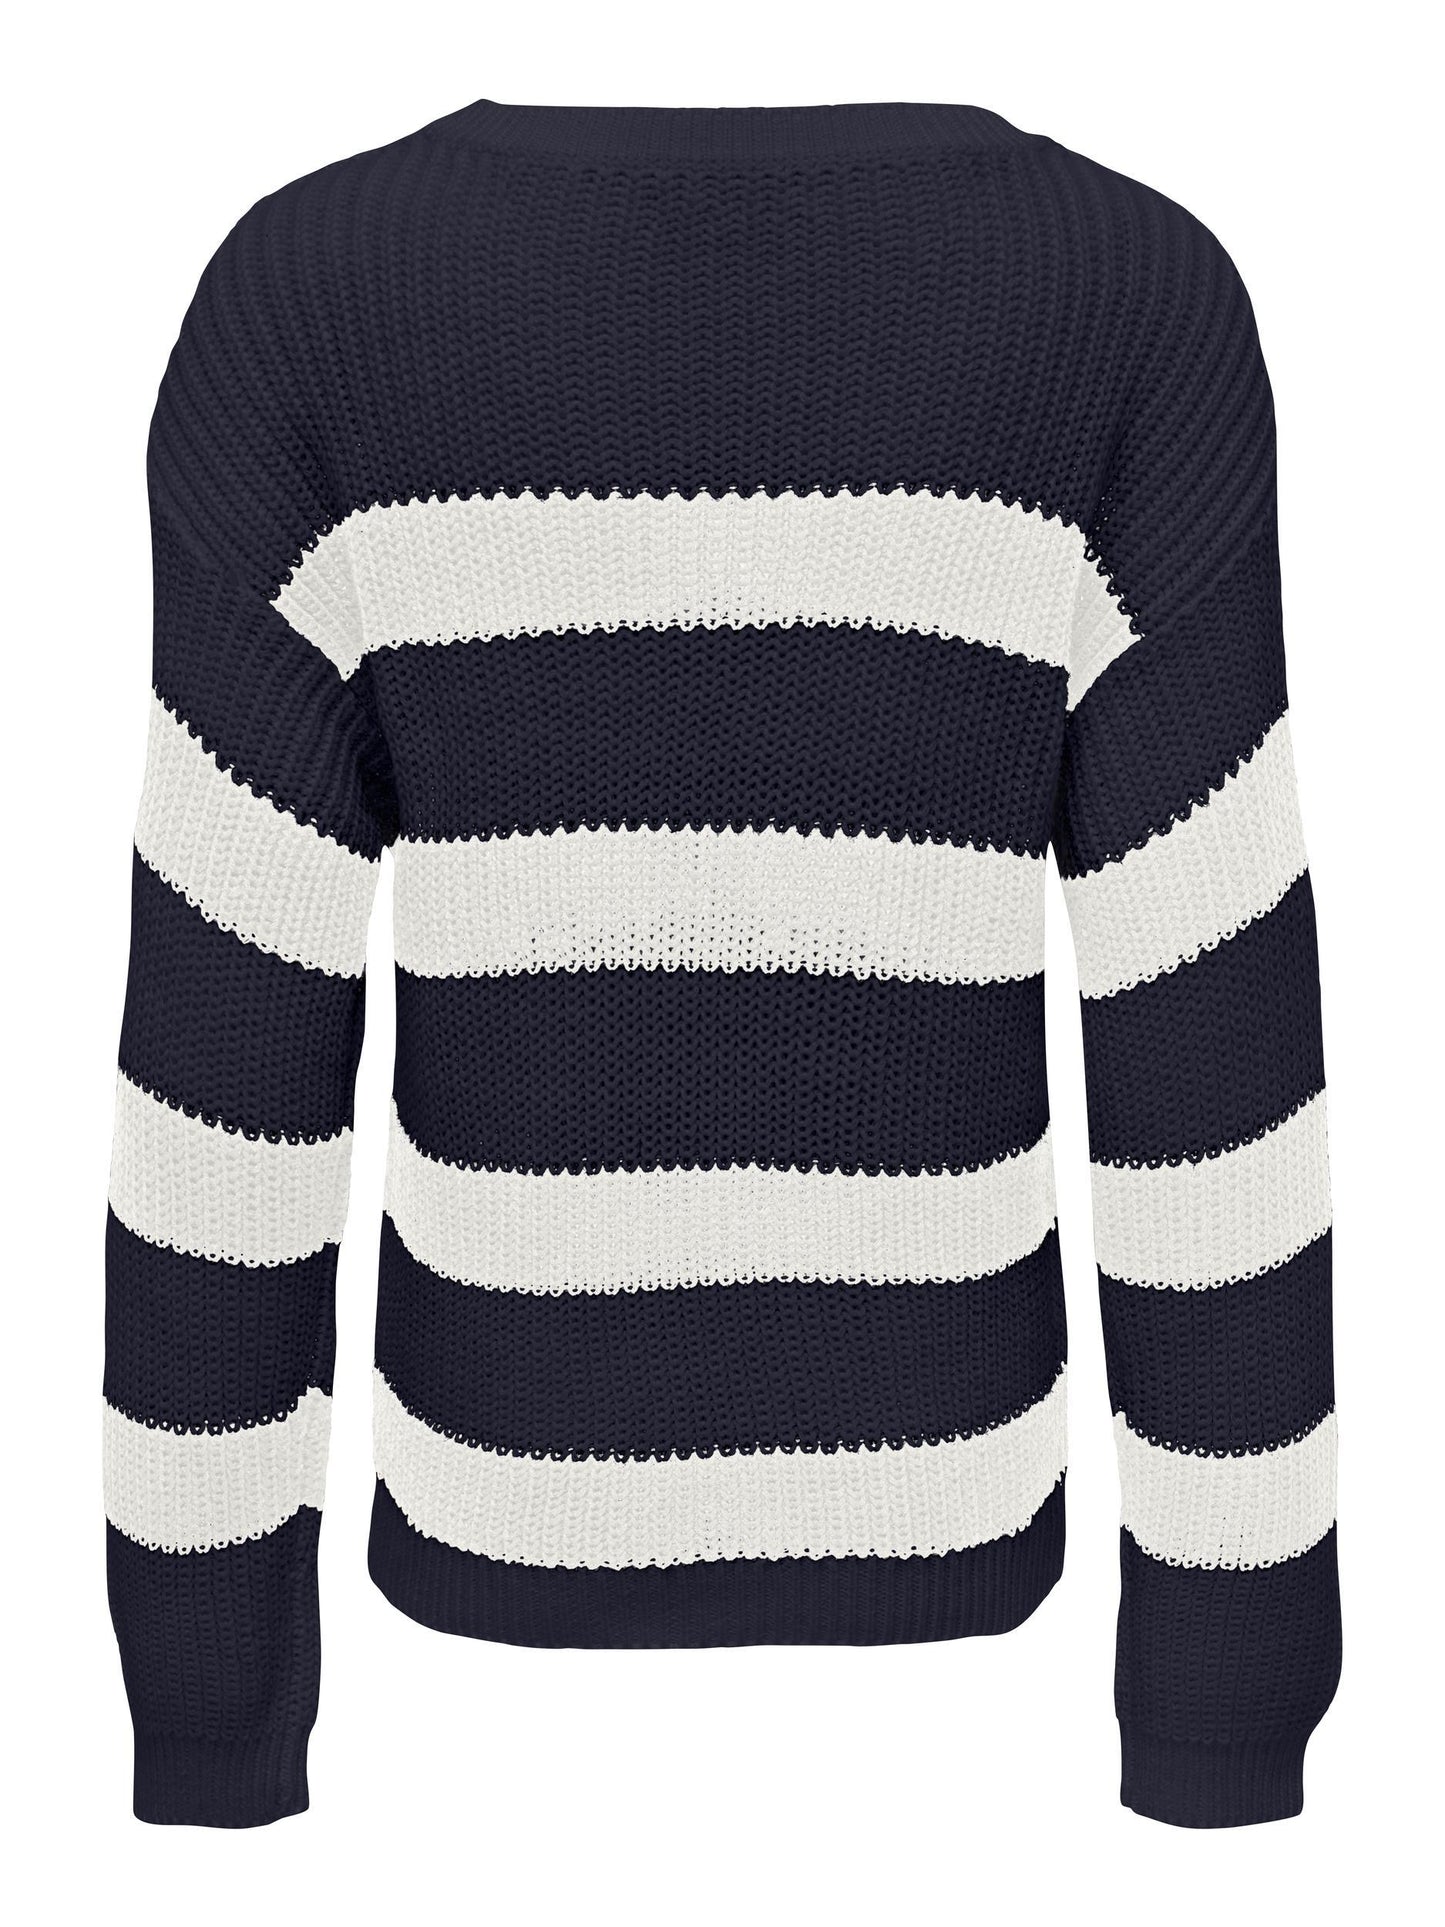 Pullover Kogsif Ls Striped Knt Only Kids